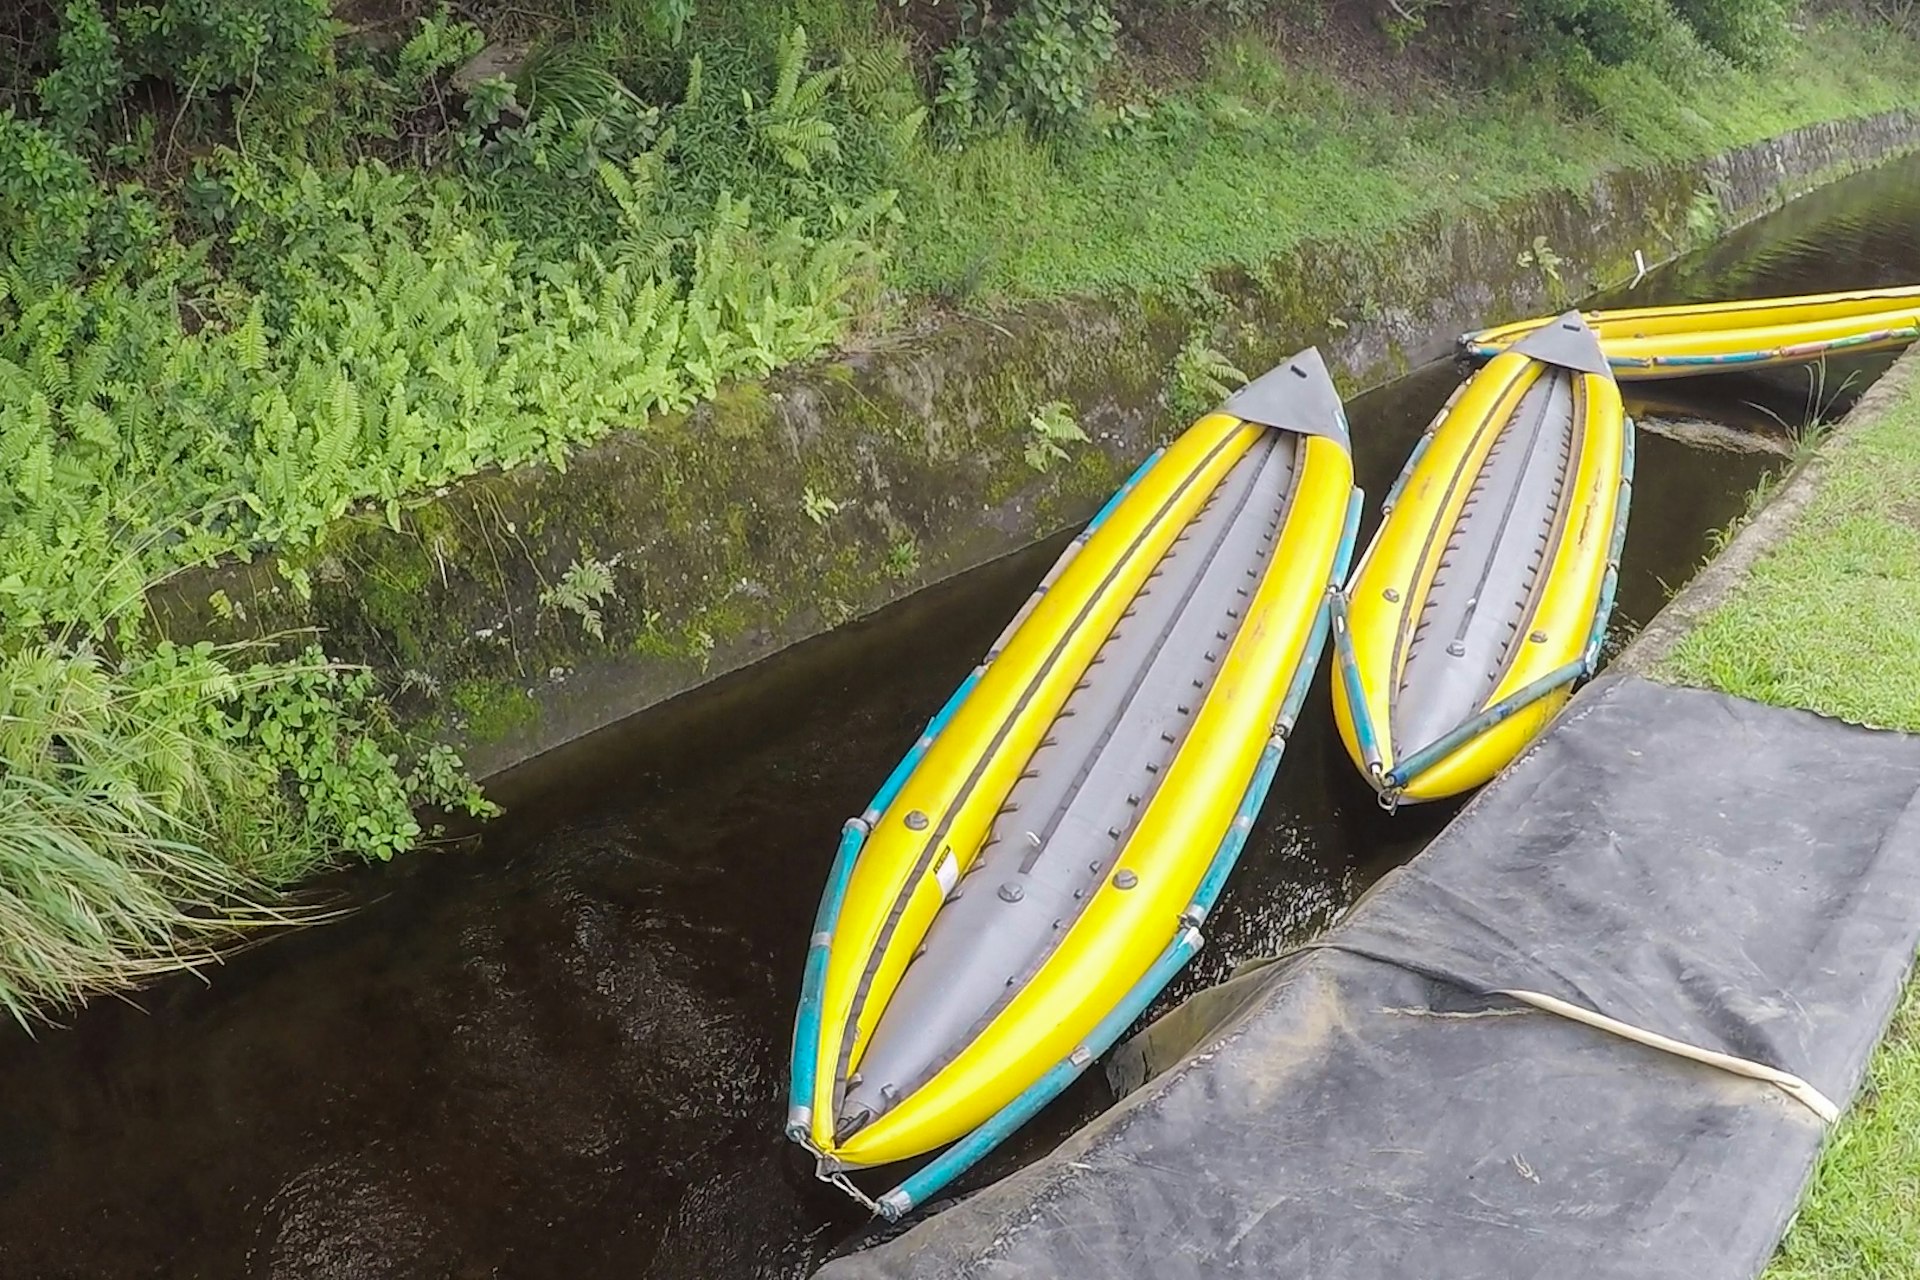 Inflatable kayaks await passengers in the Kohala Ditch © Alexander Howard / Lonely Planet